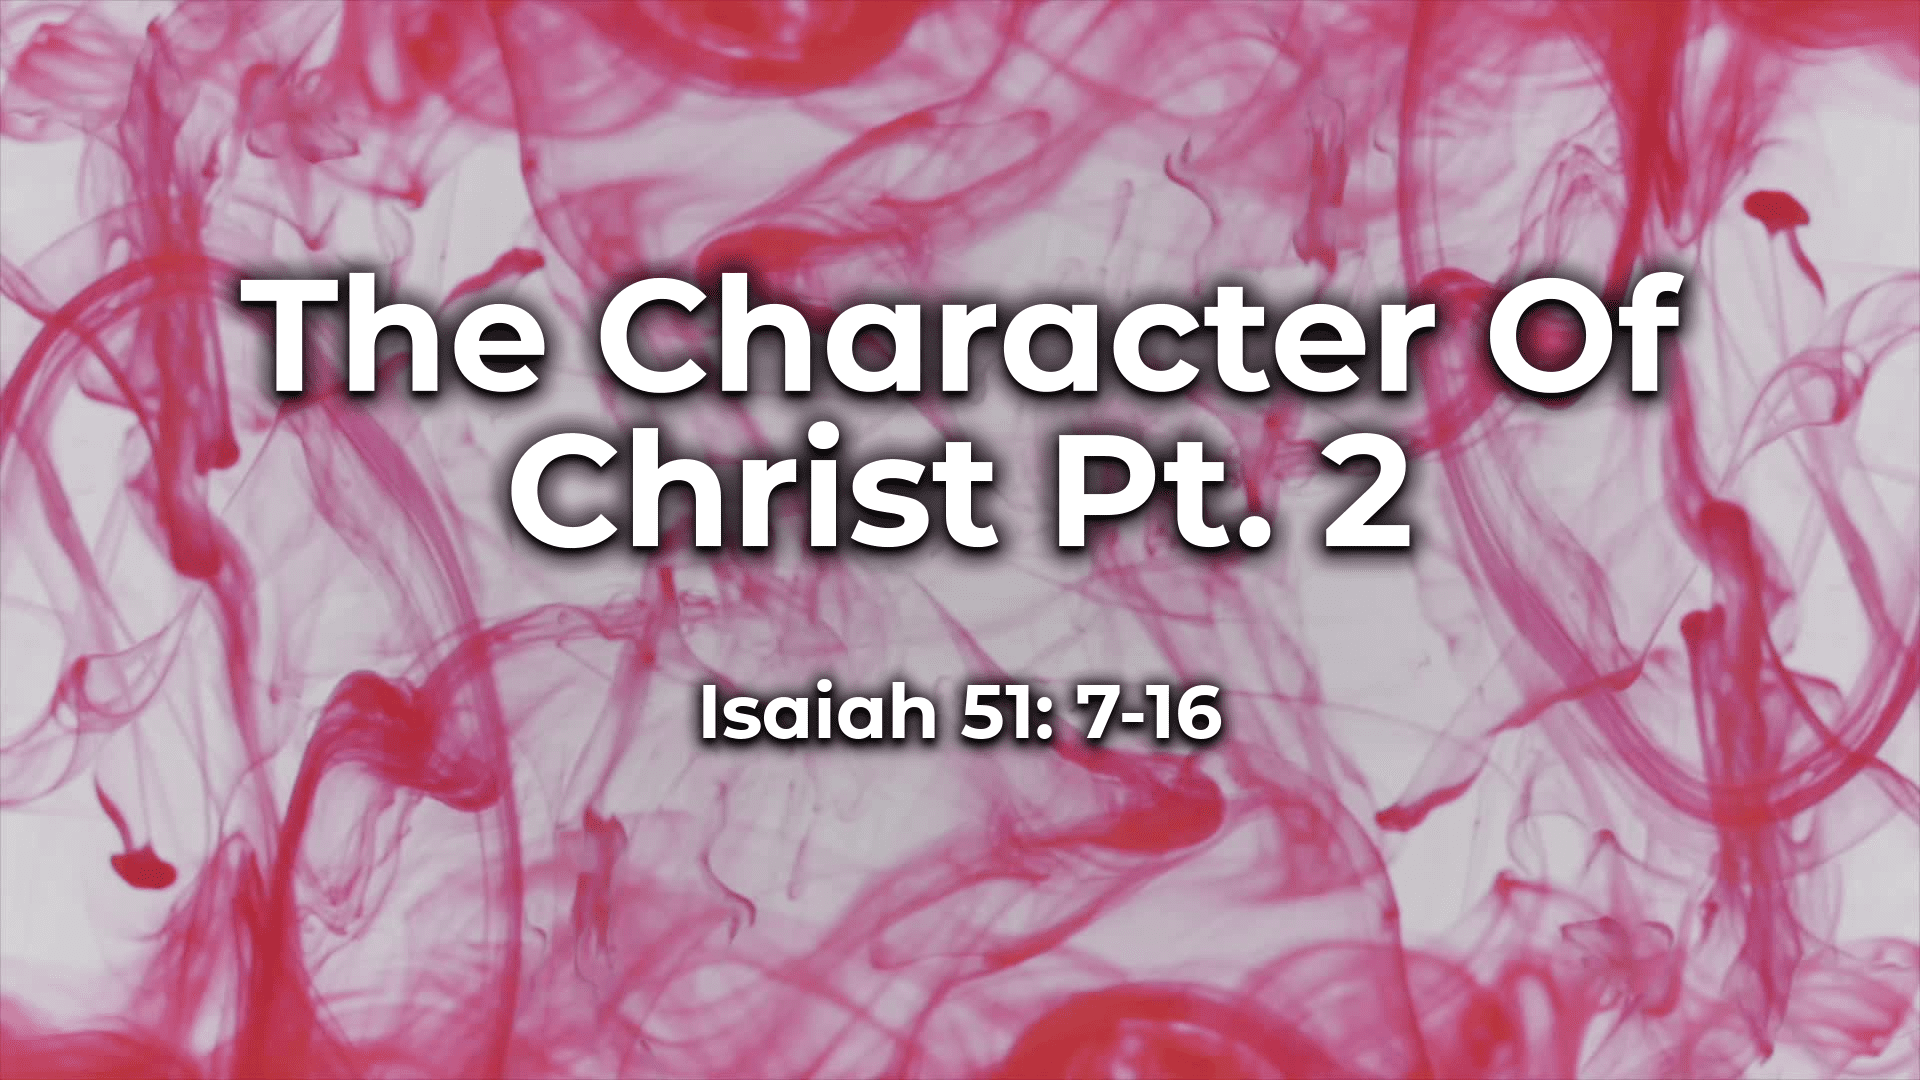 The Character Of Christ Pt. 2